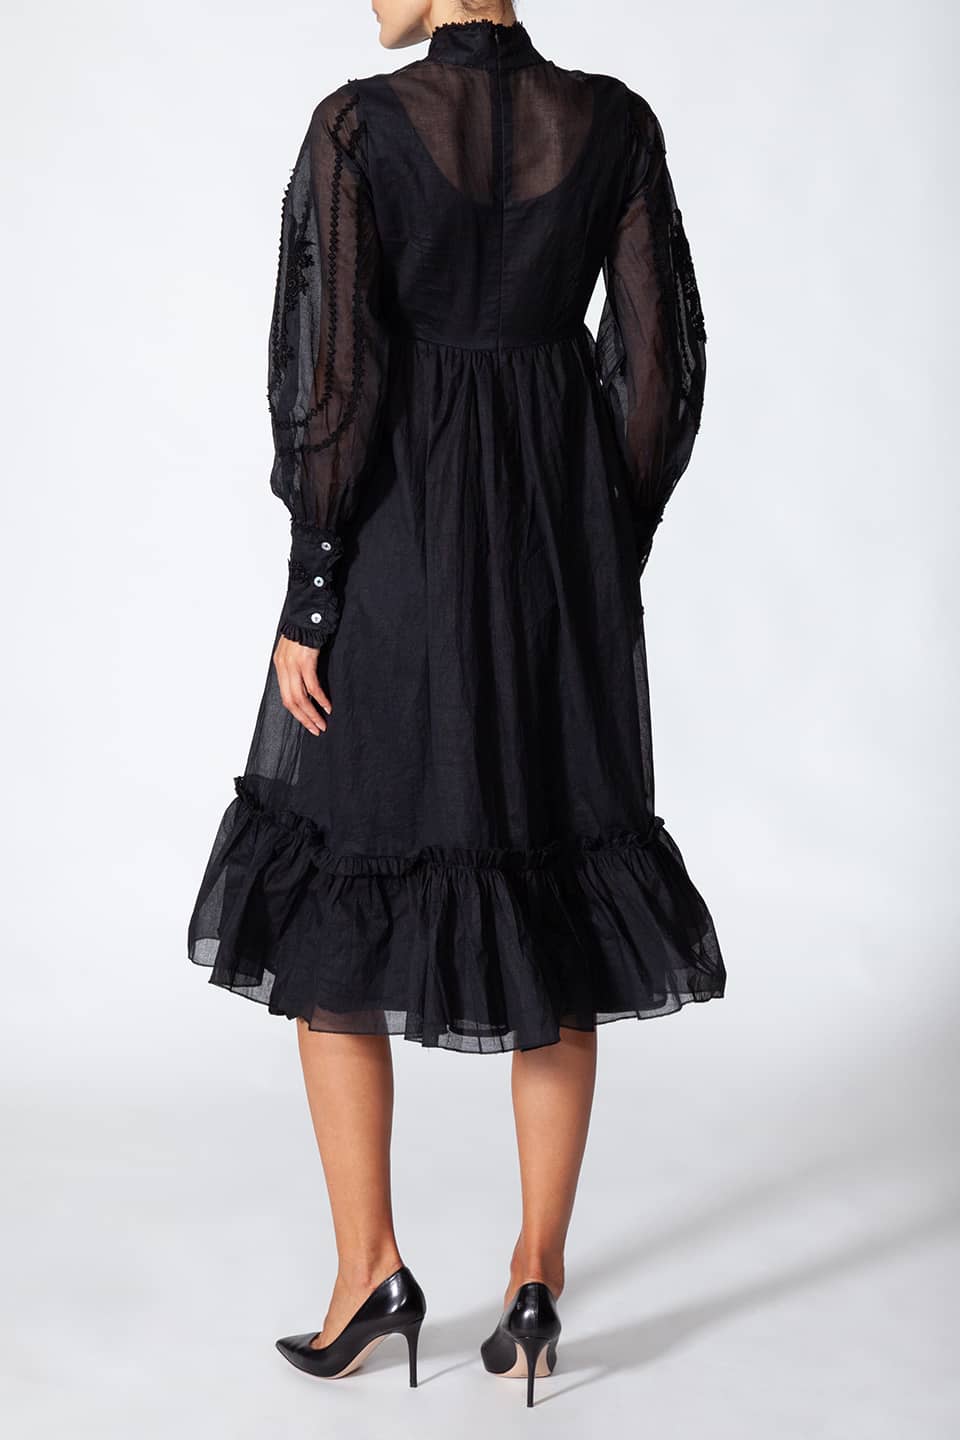 Model wearing long black dress in cotton. with floral embroidery on the chest, posing from behind. Dress is from Fashion Designer Manoush collection.